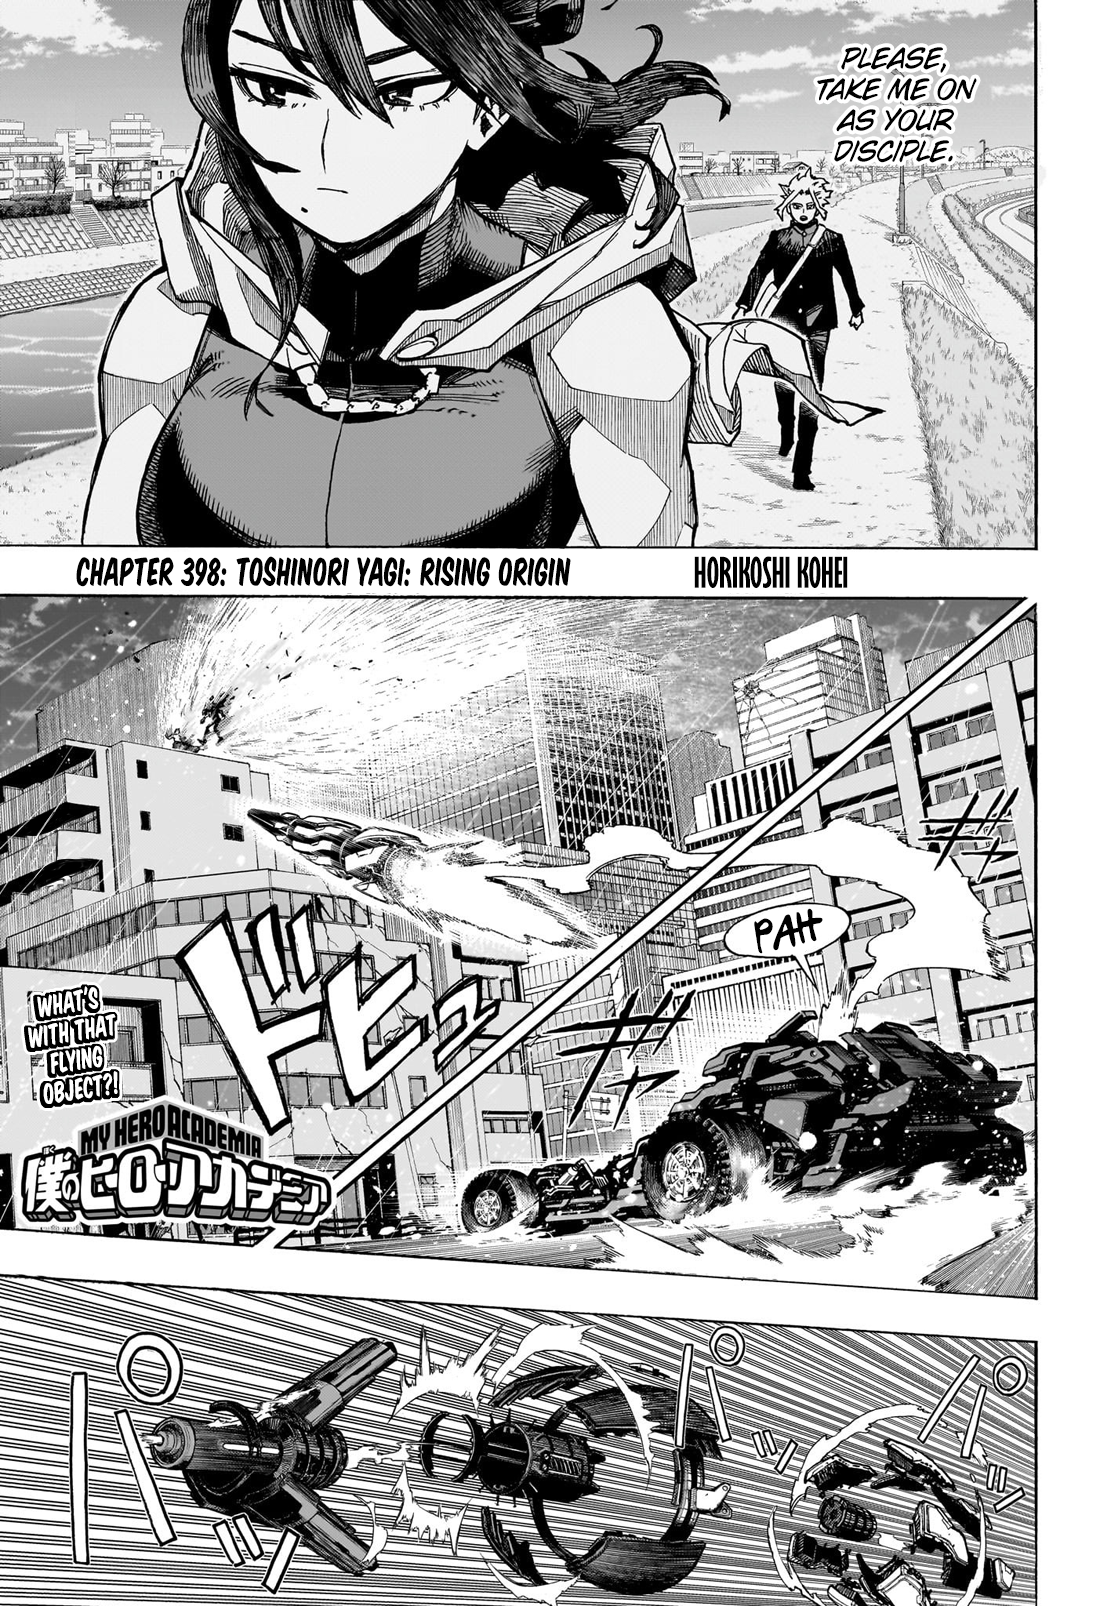 My Hero Academia, Chapter 398  TcbScans Org - Free Manga Online in High  Quality